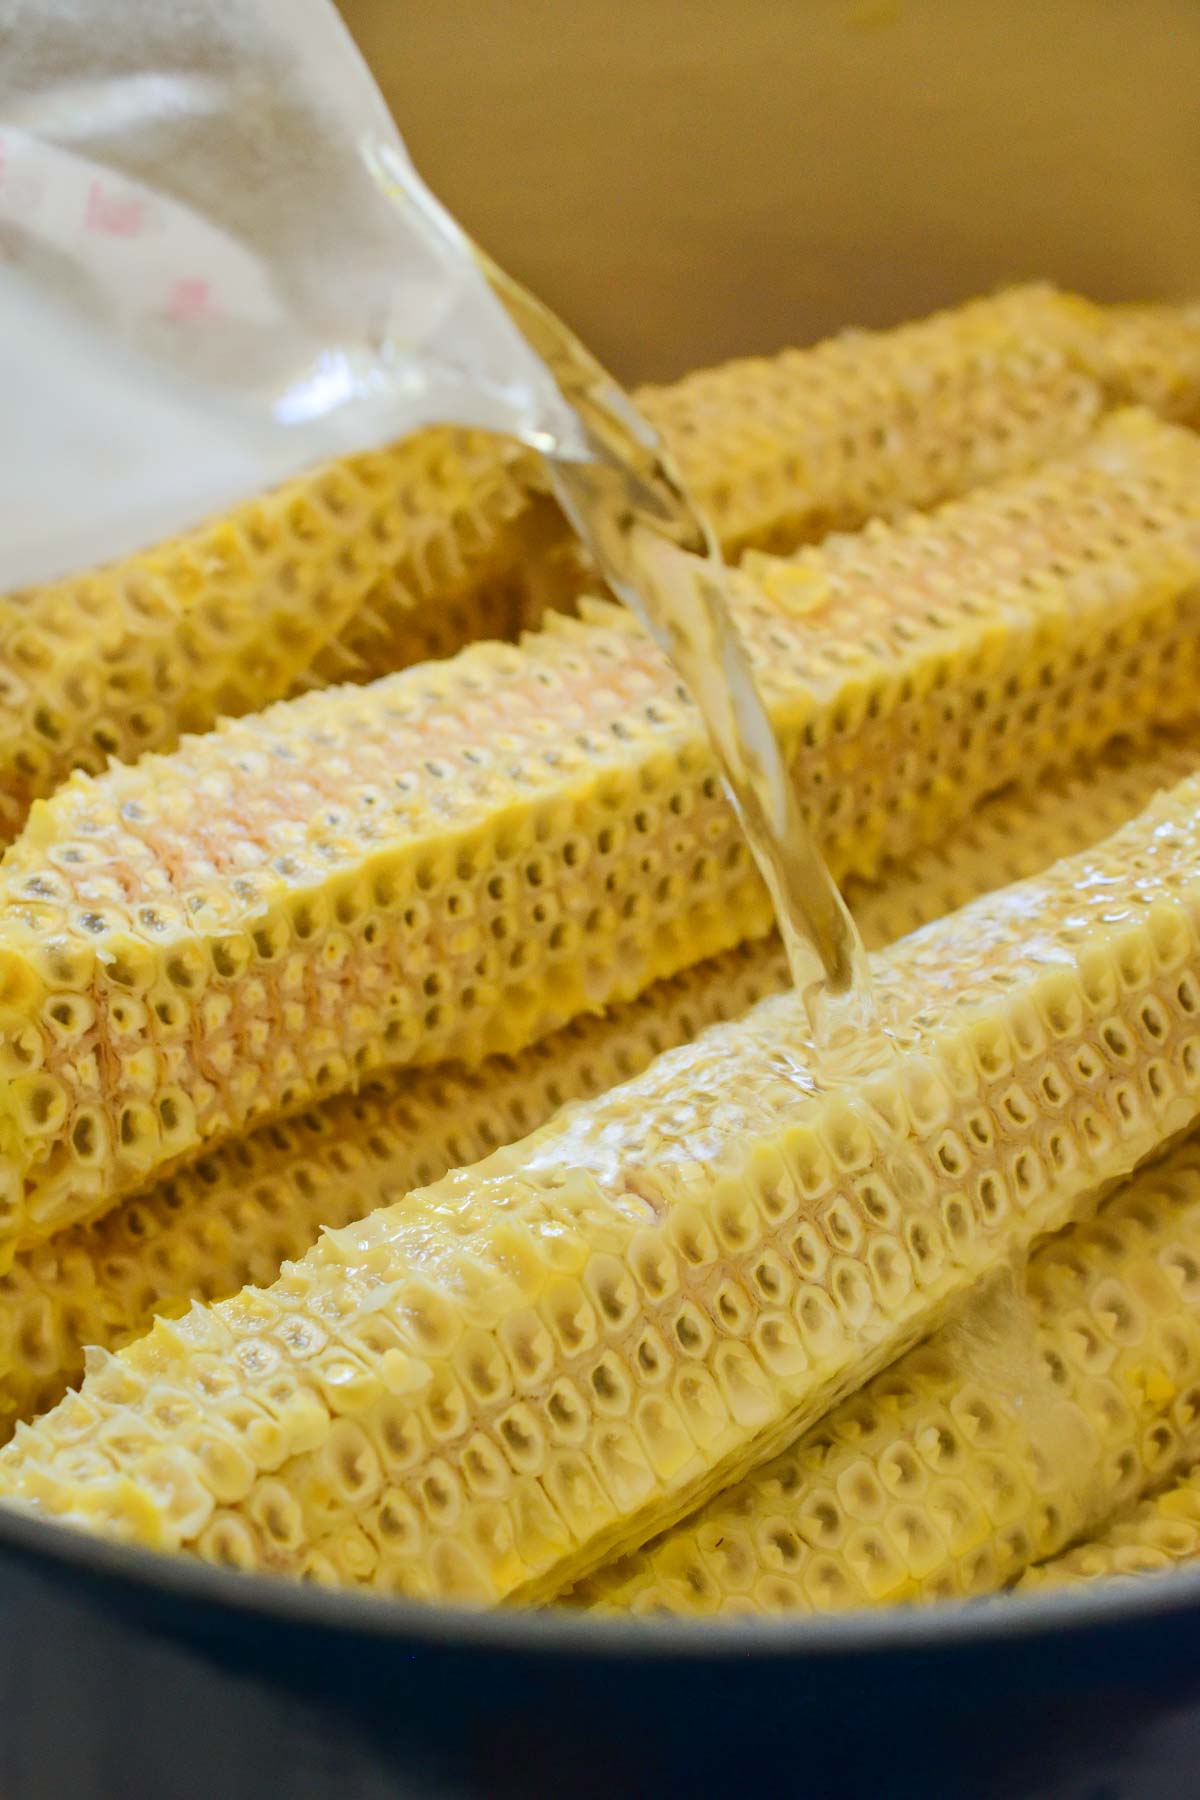 Naked corn cobs in a pot with water being poured over.